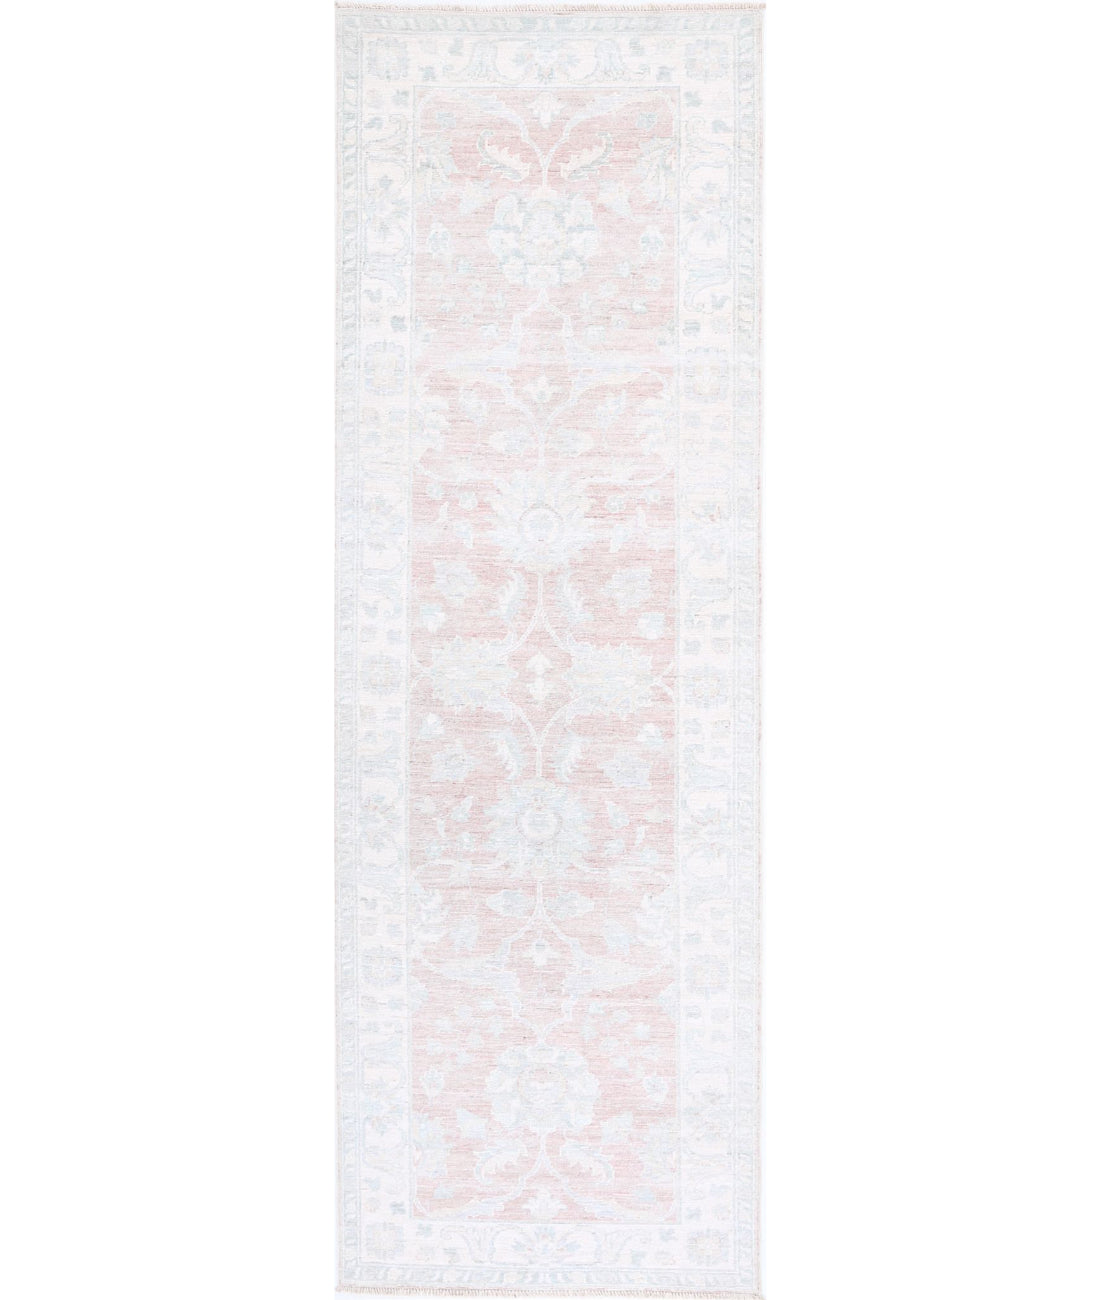 Hand Knotted Serenity Wool Rug - 2&#39;6&#39;&#39; x 8&#39;5&#39;&#39; 2&#39;6&#39;&#39; x 8&#39;5&#39;&#39; (75 X 253) / Pink / Ivory